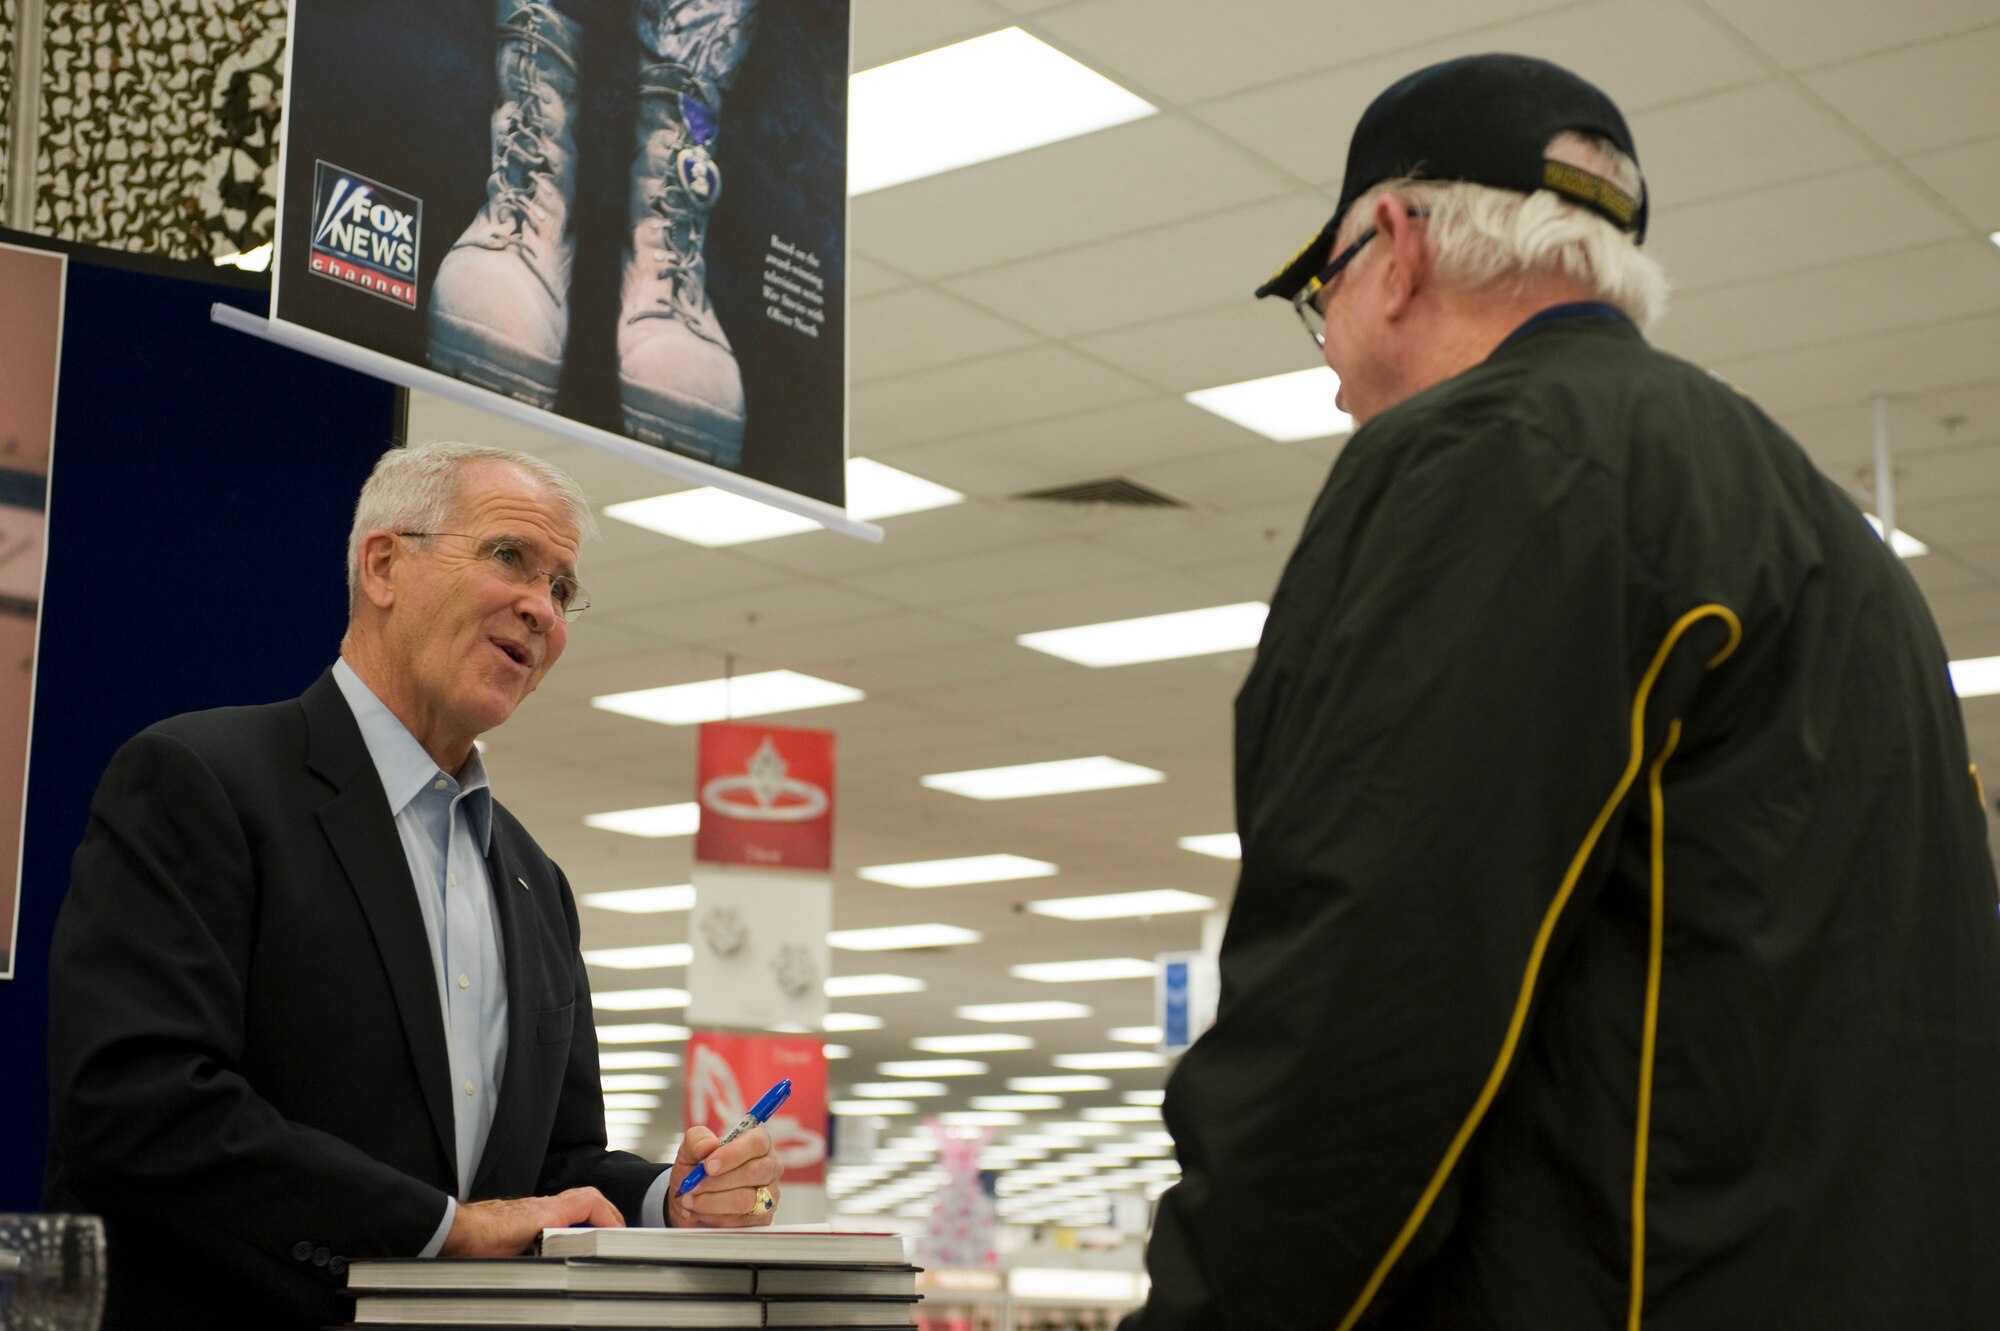 Oliver North, signs an autograph for retired Chief Master Sgt. Grady Griffin, at the Exchange during a book signing Nov. 9, 2013, at Nellis Air Force Base, Nev. North signed autographs for his book “American Heroes, On the Homefront” during his visit to Nellis AFB. North served 22 years in the U.S. Marine Corps and retired at the rank of lieutenant colonel. (U.S. Air Force photo by Airman 1st Class Christopher Tam)